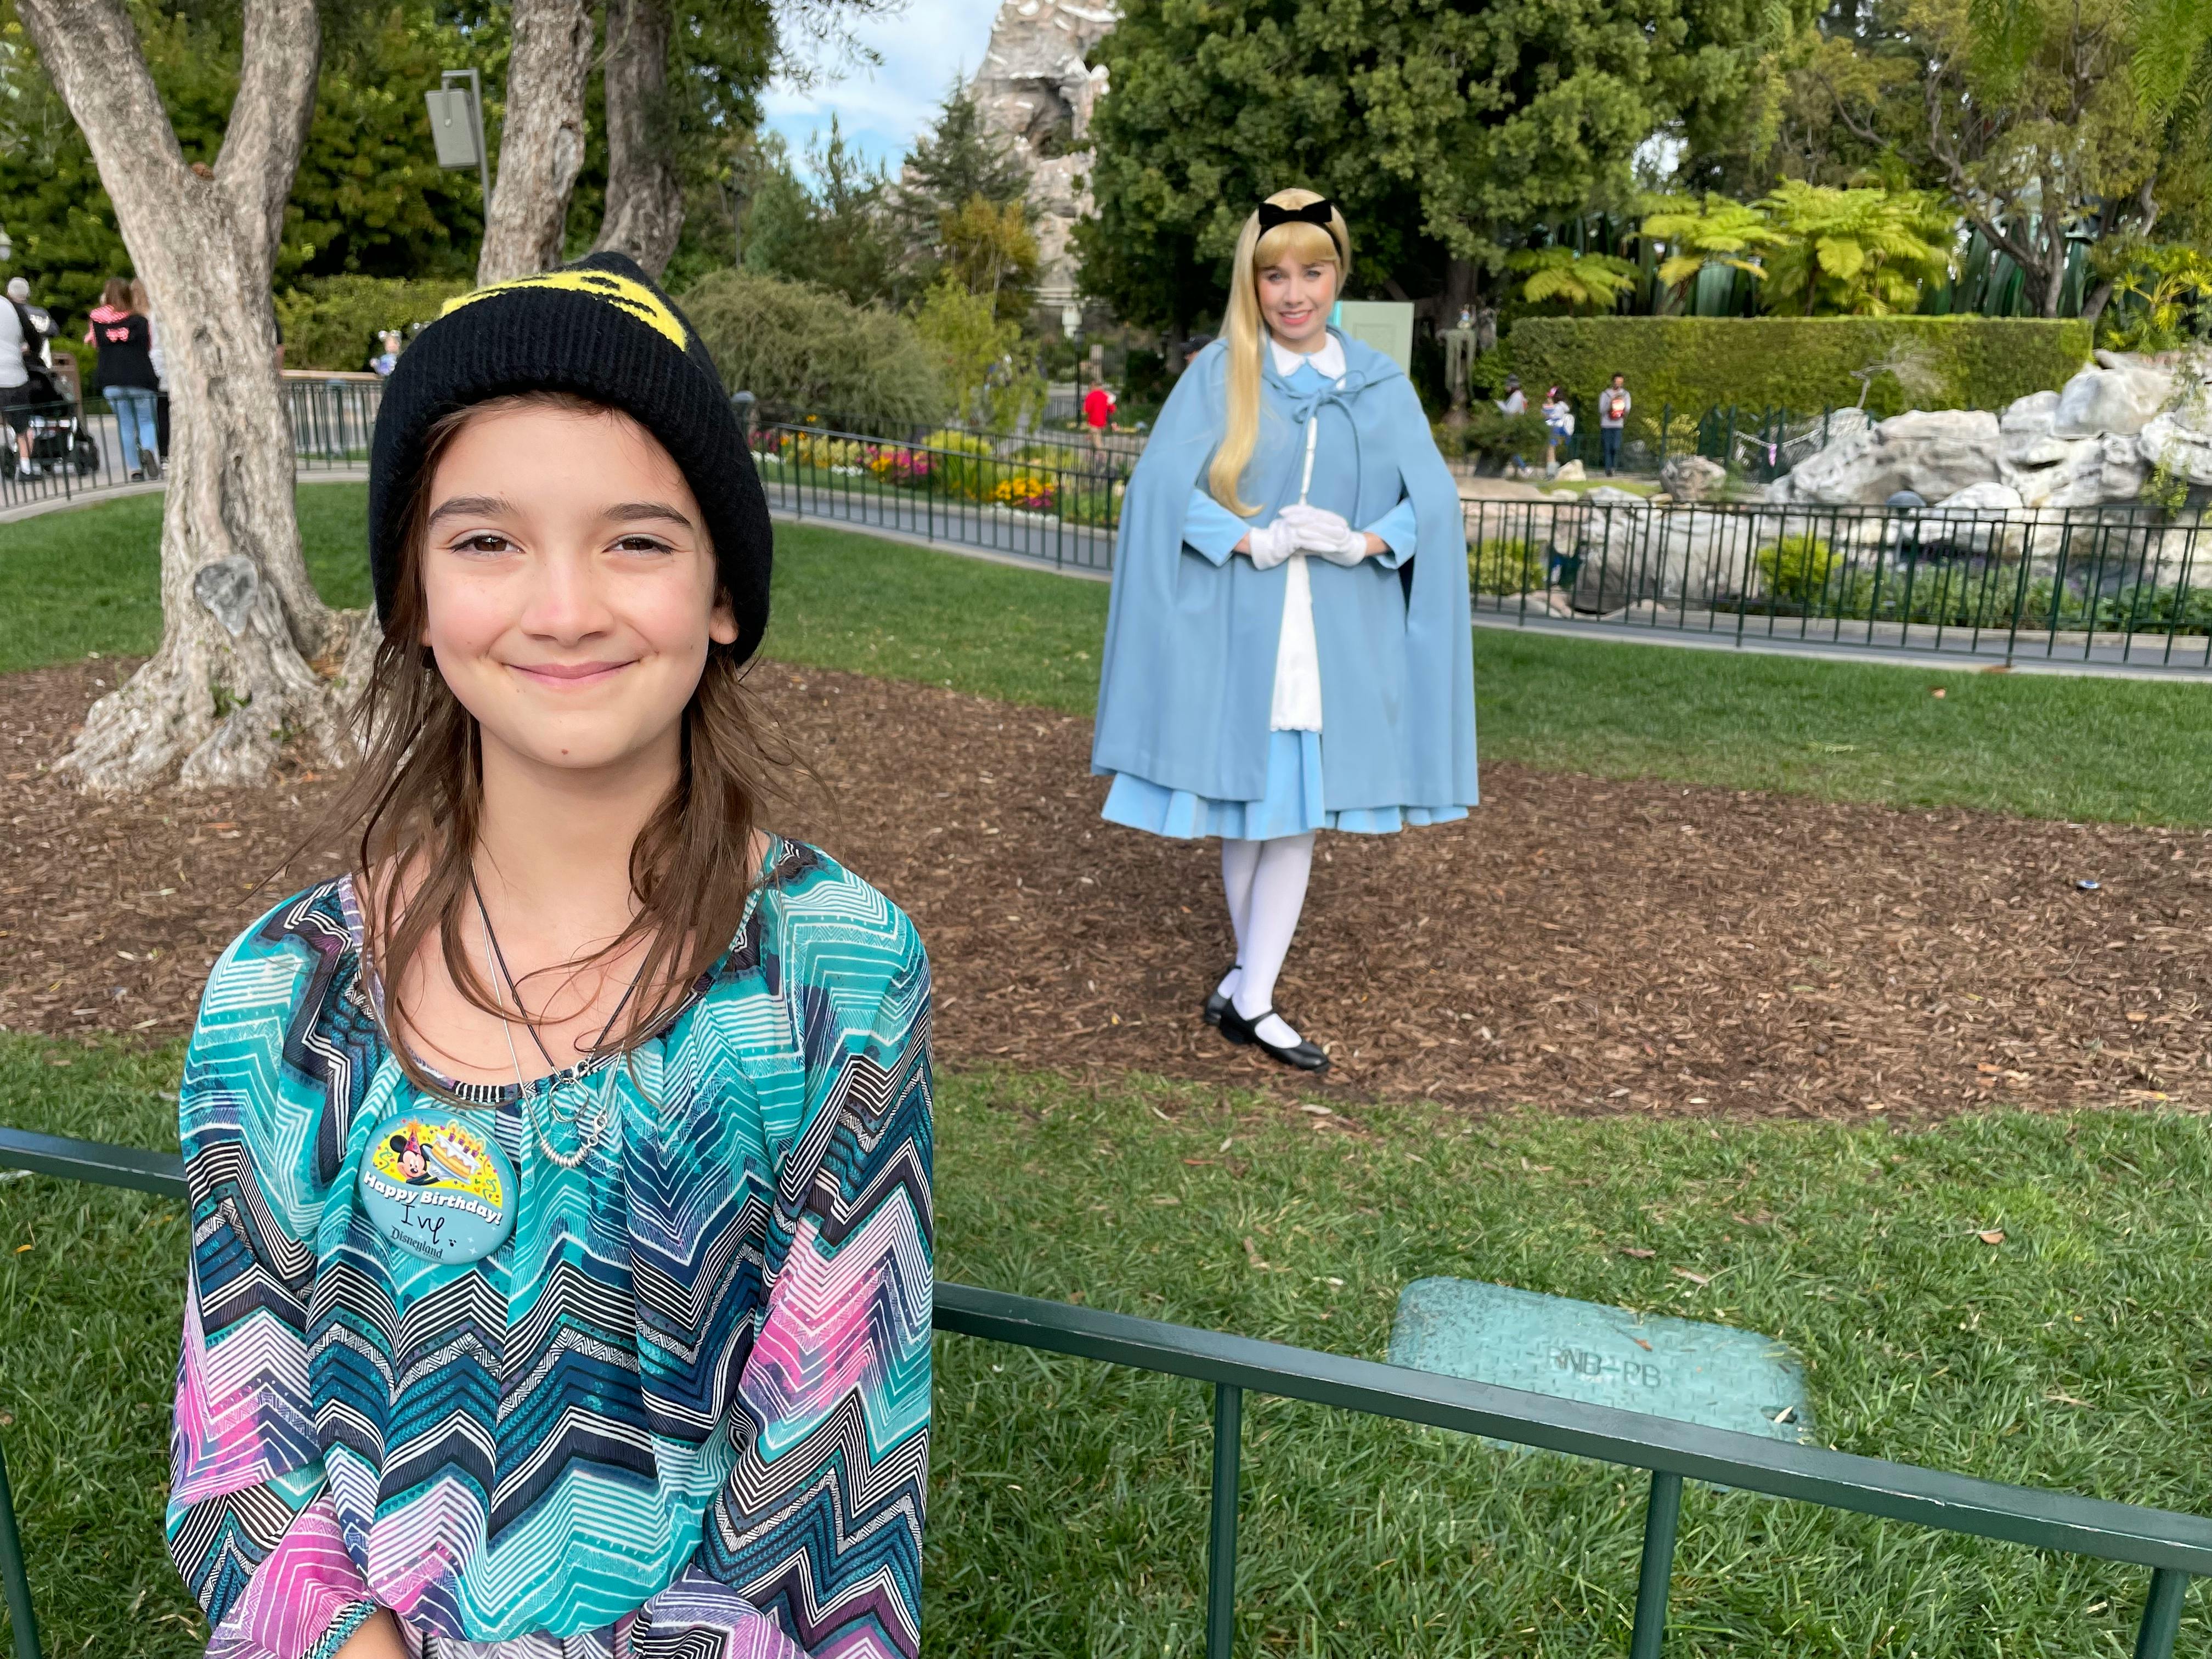 Disneyland meet and greet with Alice